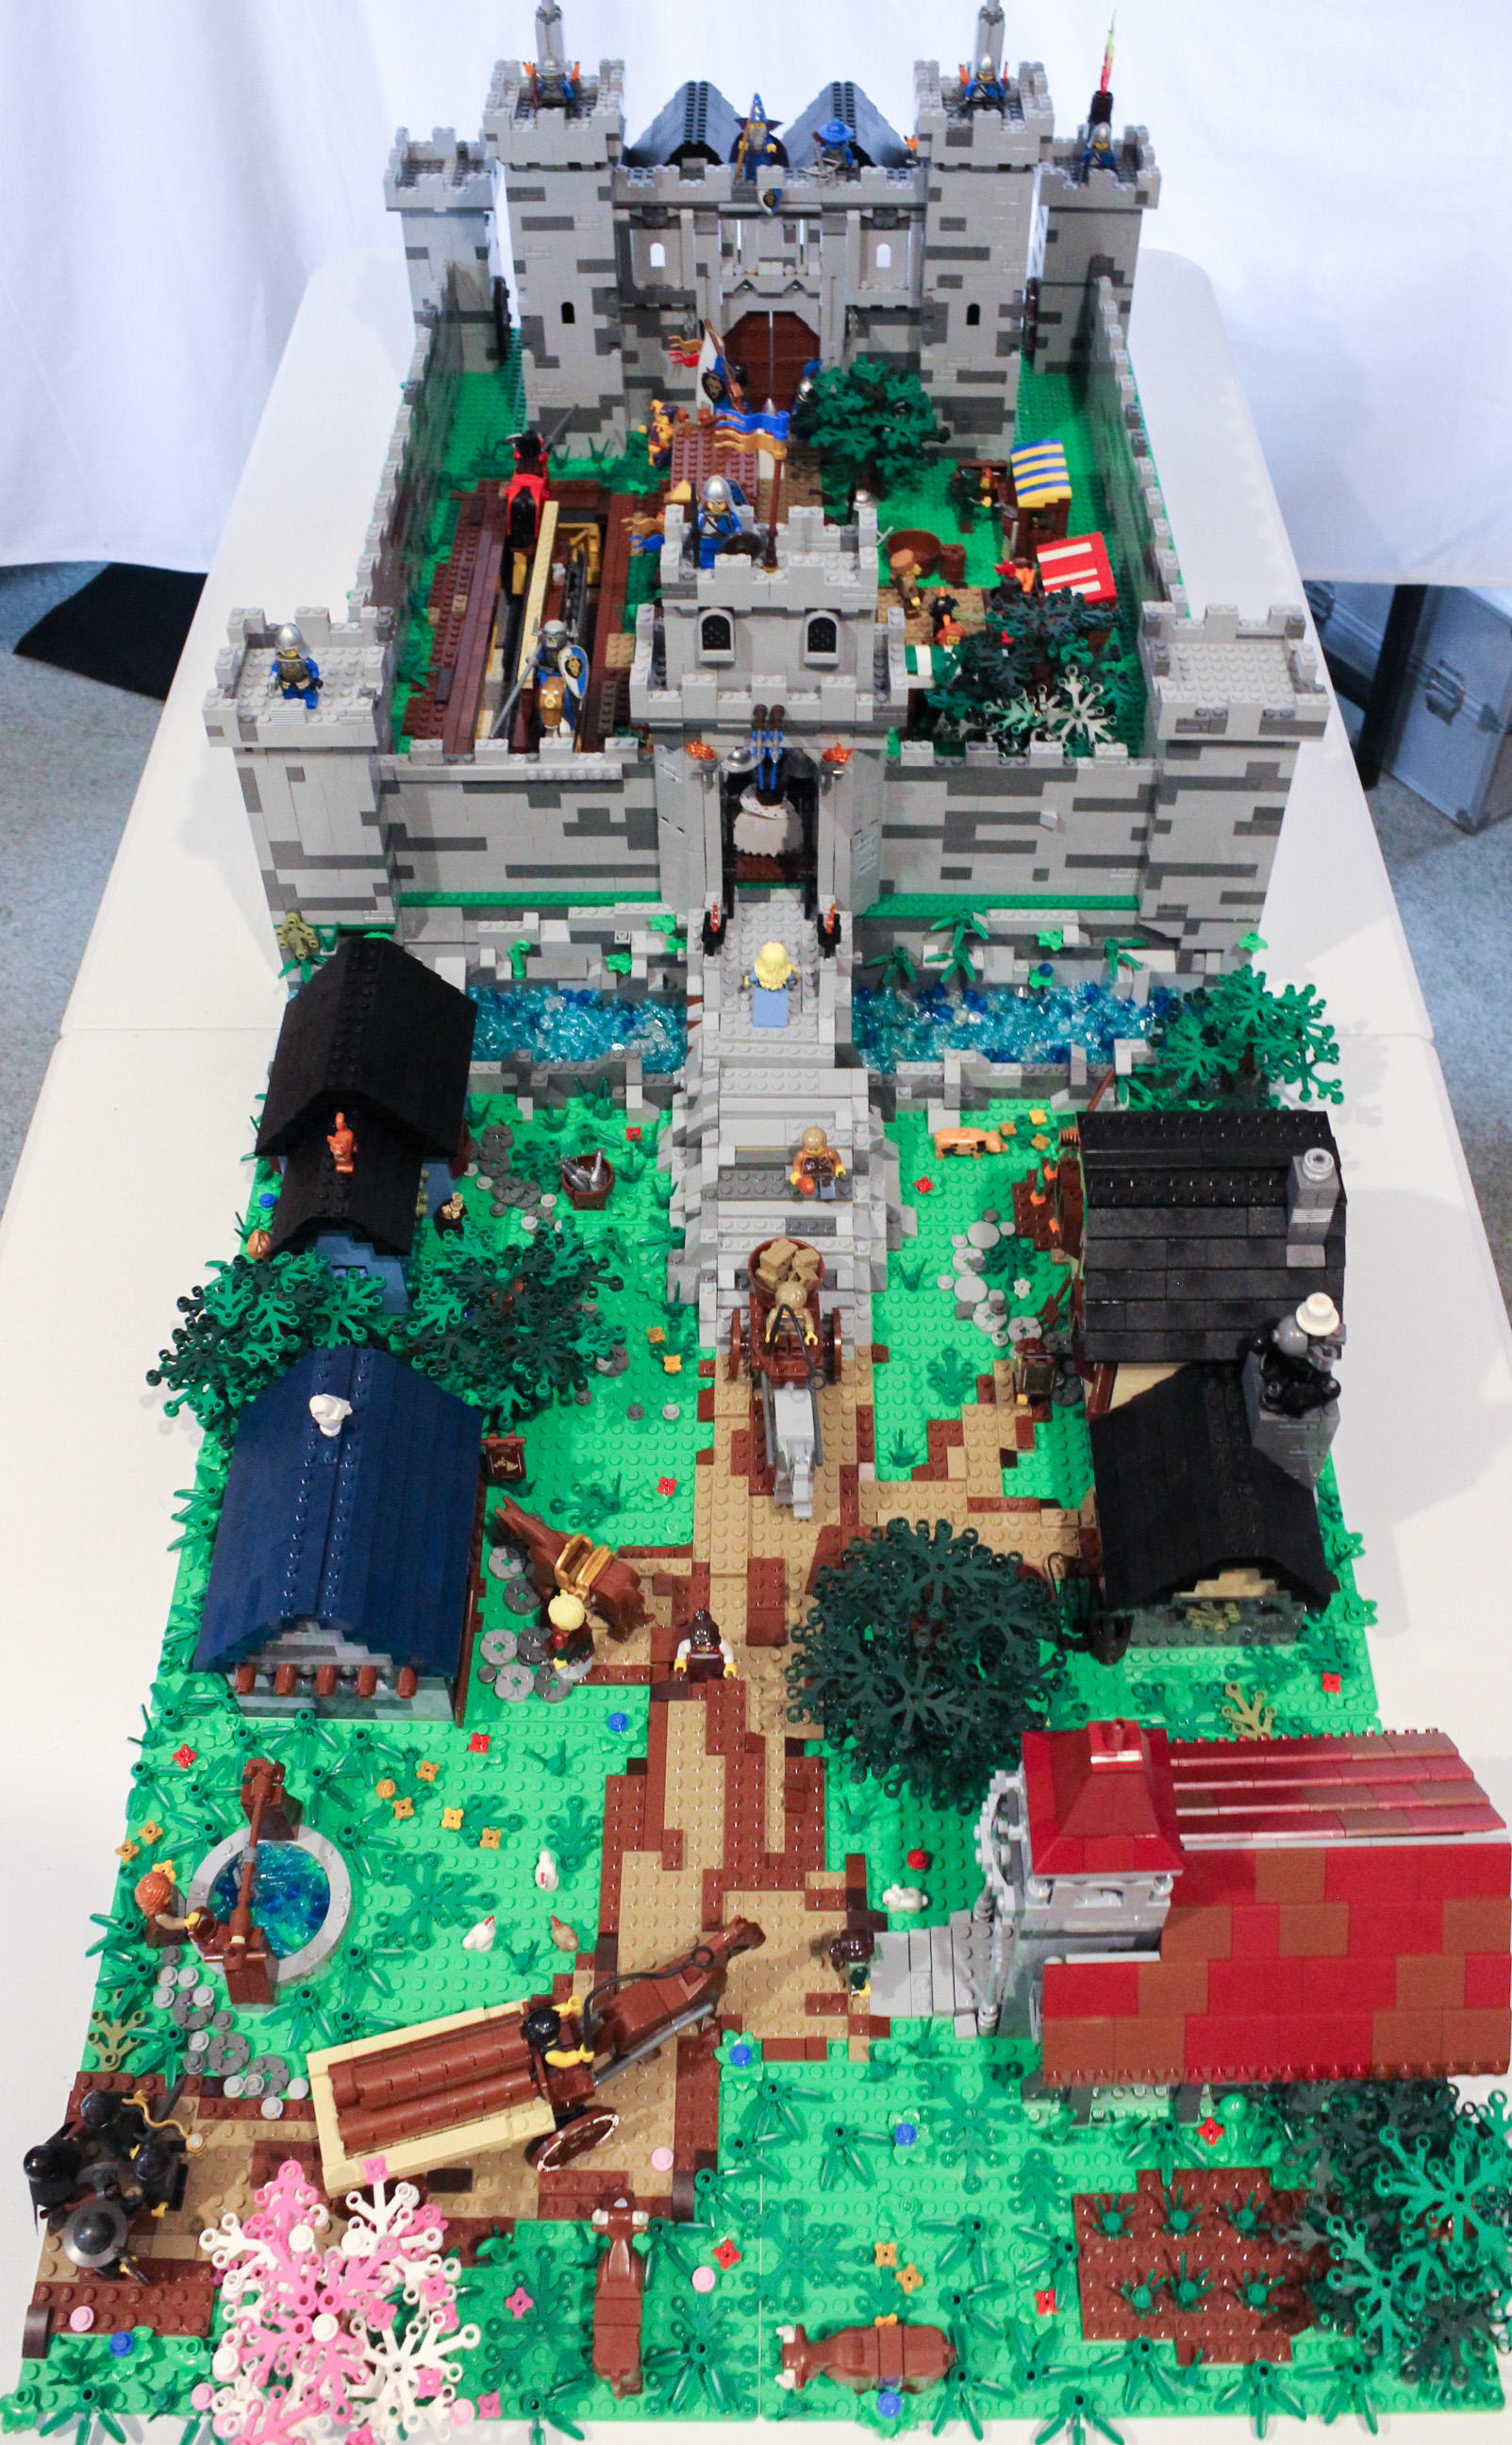 LEGO Sets Over 1,000 Pieces, Ranked by Master Builders